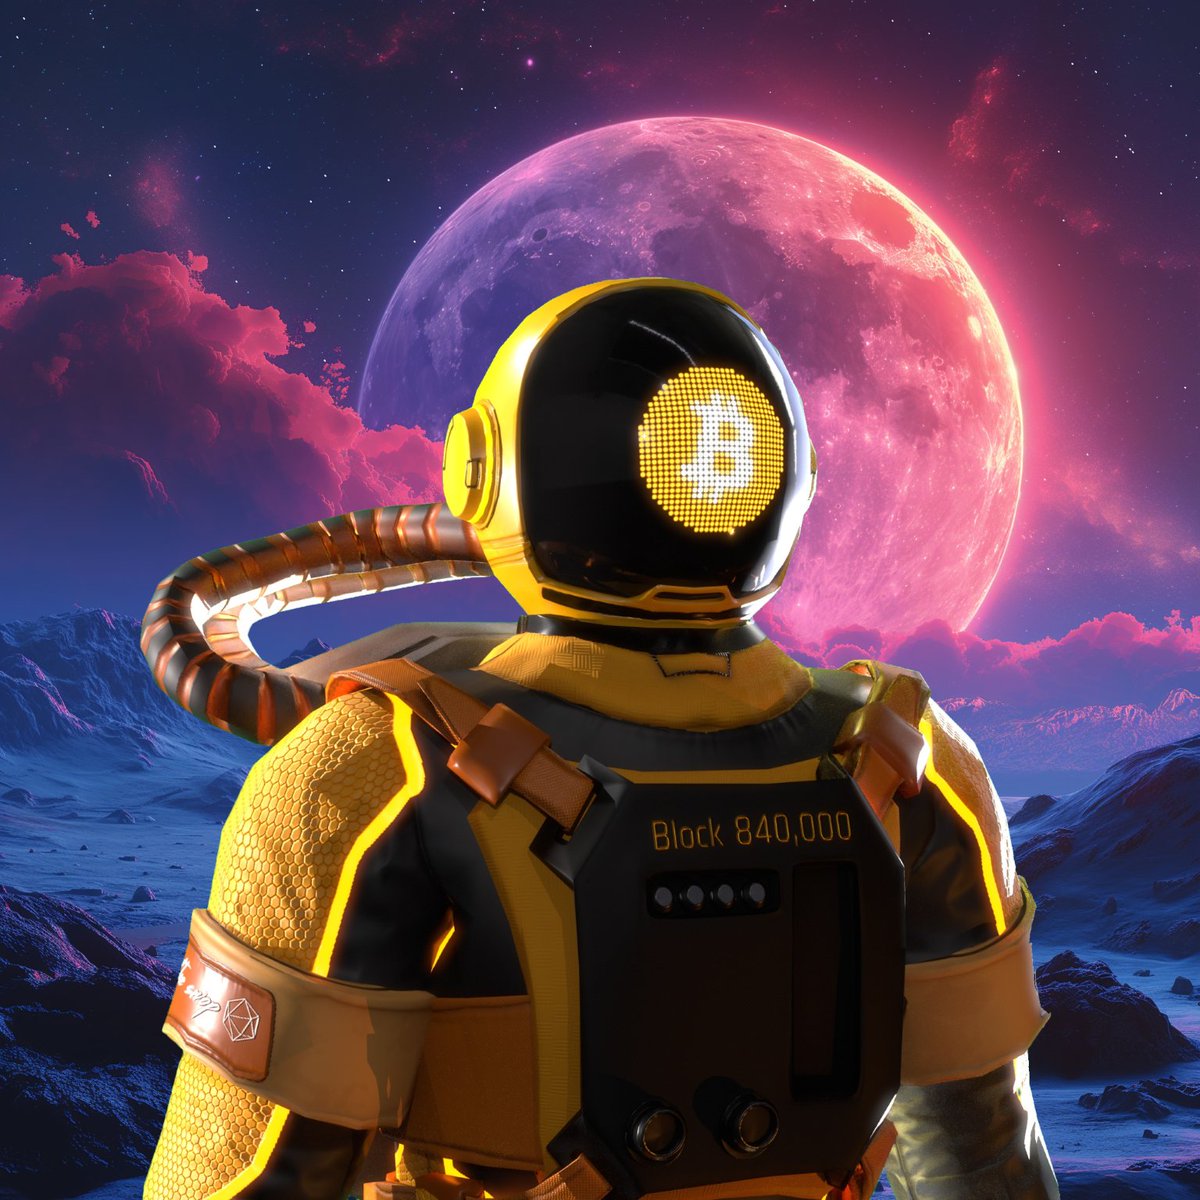 Bitcoin Astronauts Airdrop List 

101,035 NFTs Total Largest Drop in Toniq History! (potentially the entire ICP Ecosystem - DSCVR might have us beat)

Those who filled out the Google Form correctly!

DSCVR Portals
👉 ckBTC
👉 Gaming Portal
👉 Music Portal
👉 The Swop
👉 Goated